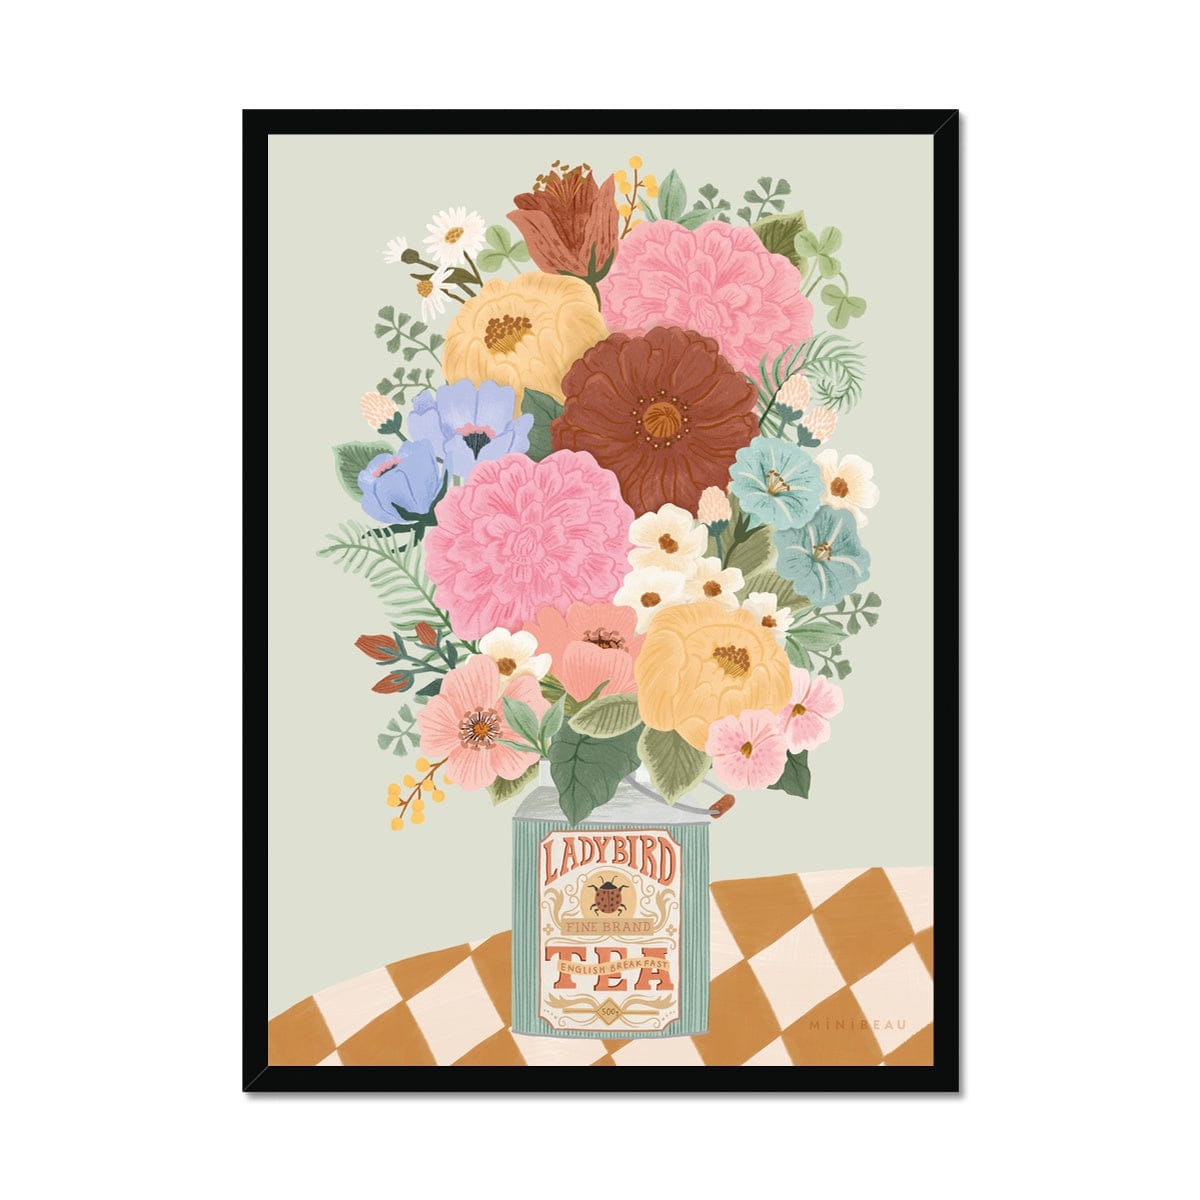 Art print in a black frame. Our boho floral art print consists of a bunch of flowers and foliage in a vintage square ladybird tea bottle on a table with a checked tablecloth on a light green background. The flowers are of varying types and come in shades of red, pink, purple, blue, yellow and cream.